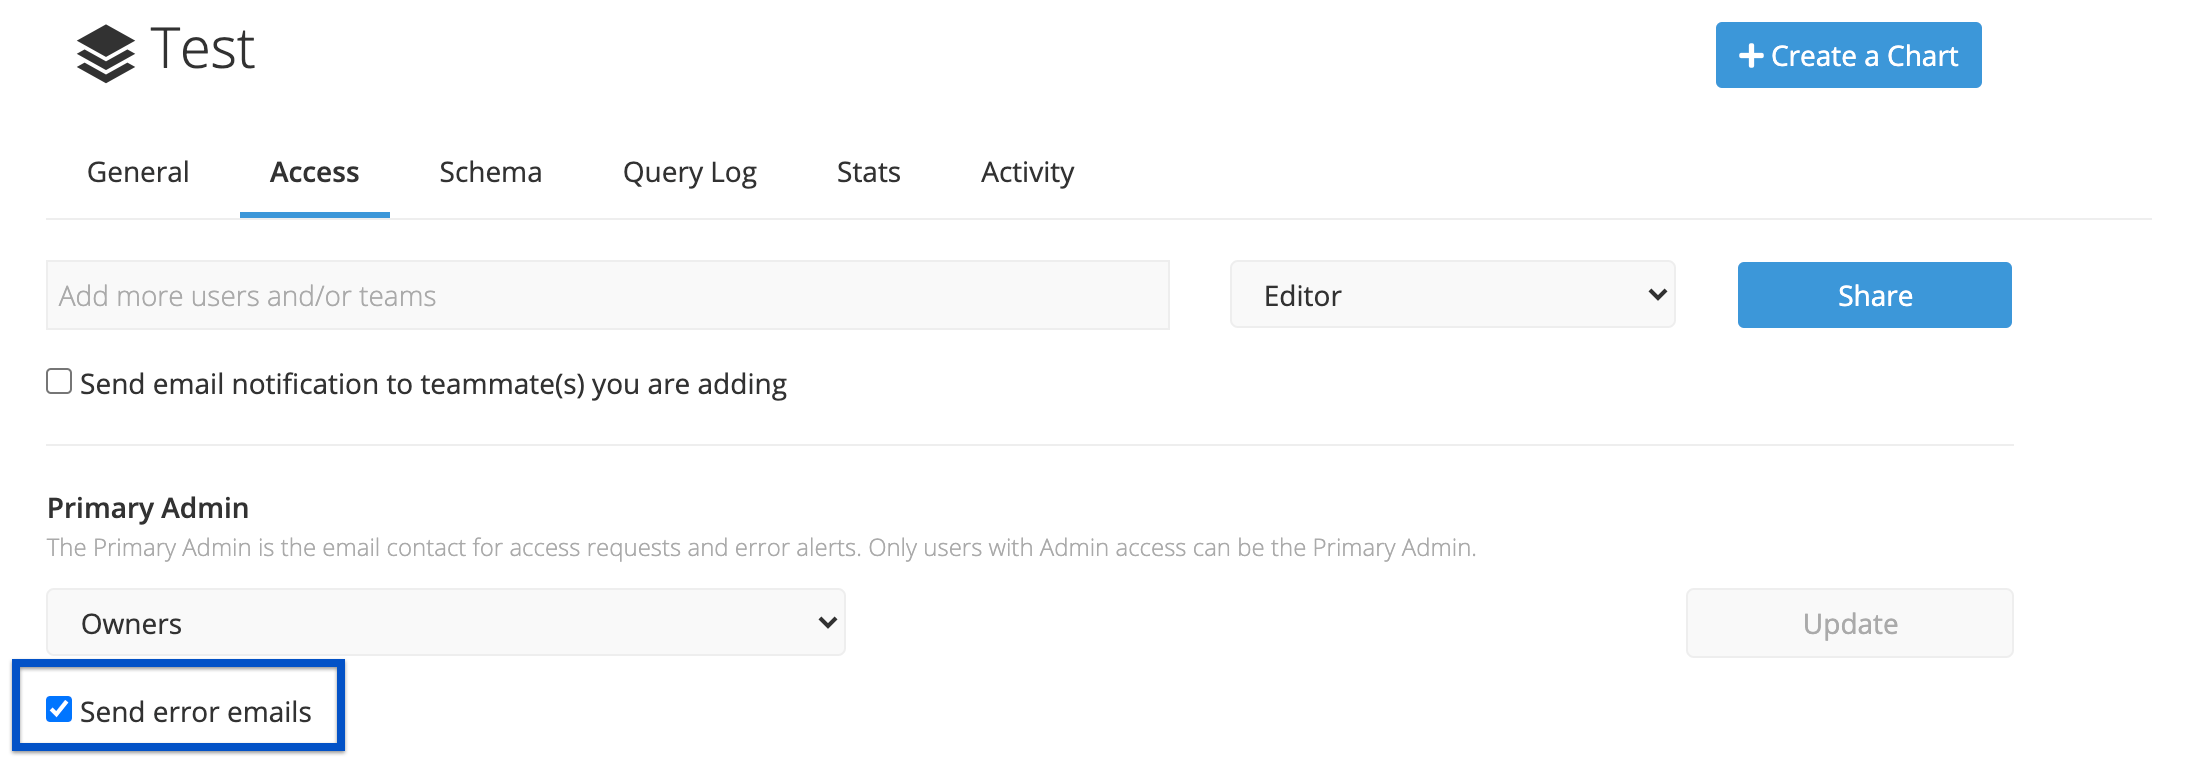 Select to Send error emails to the Primary Admin of the Data Store